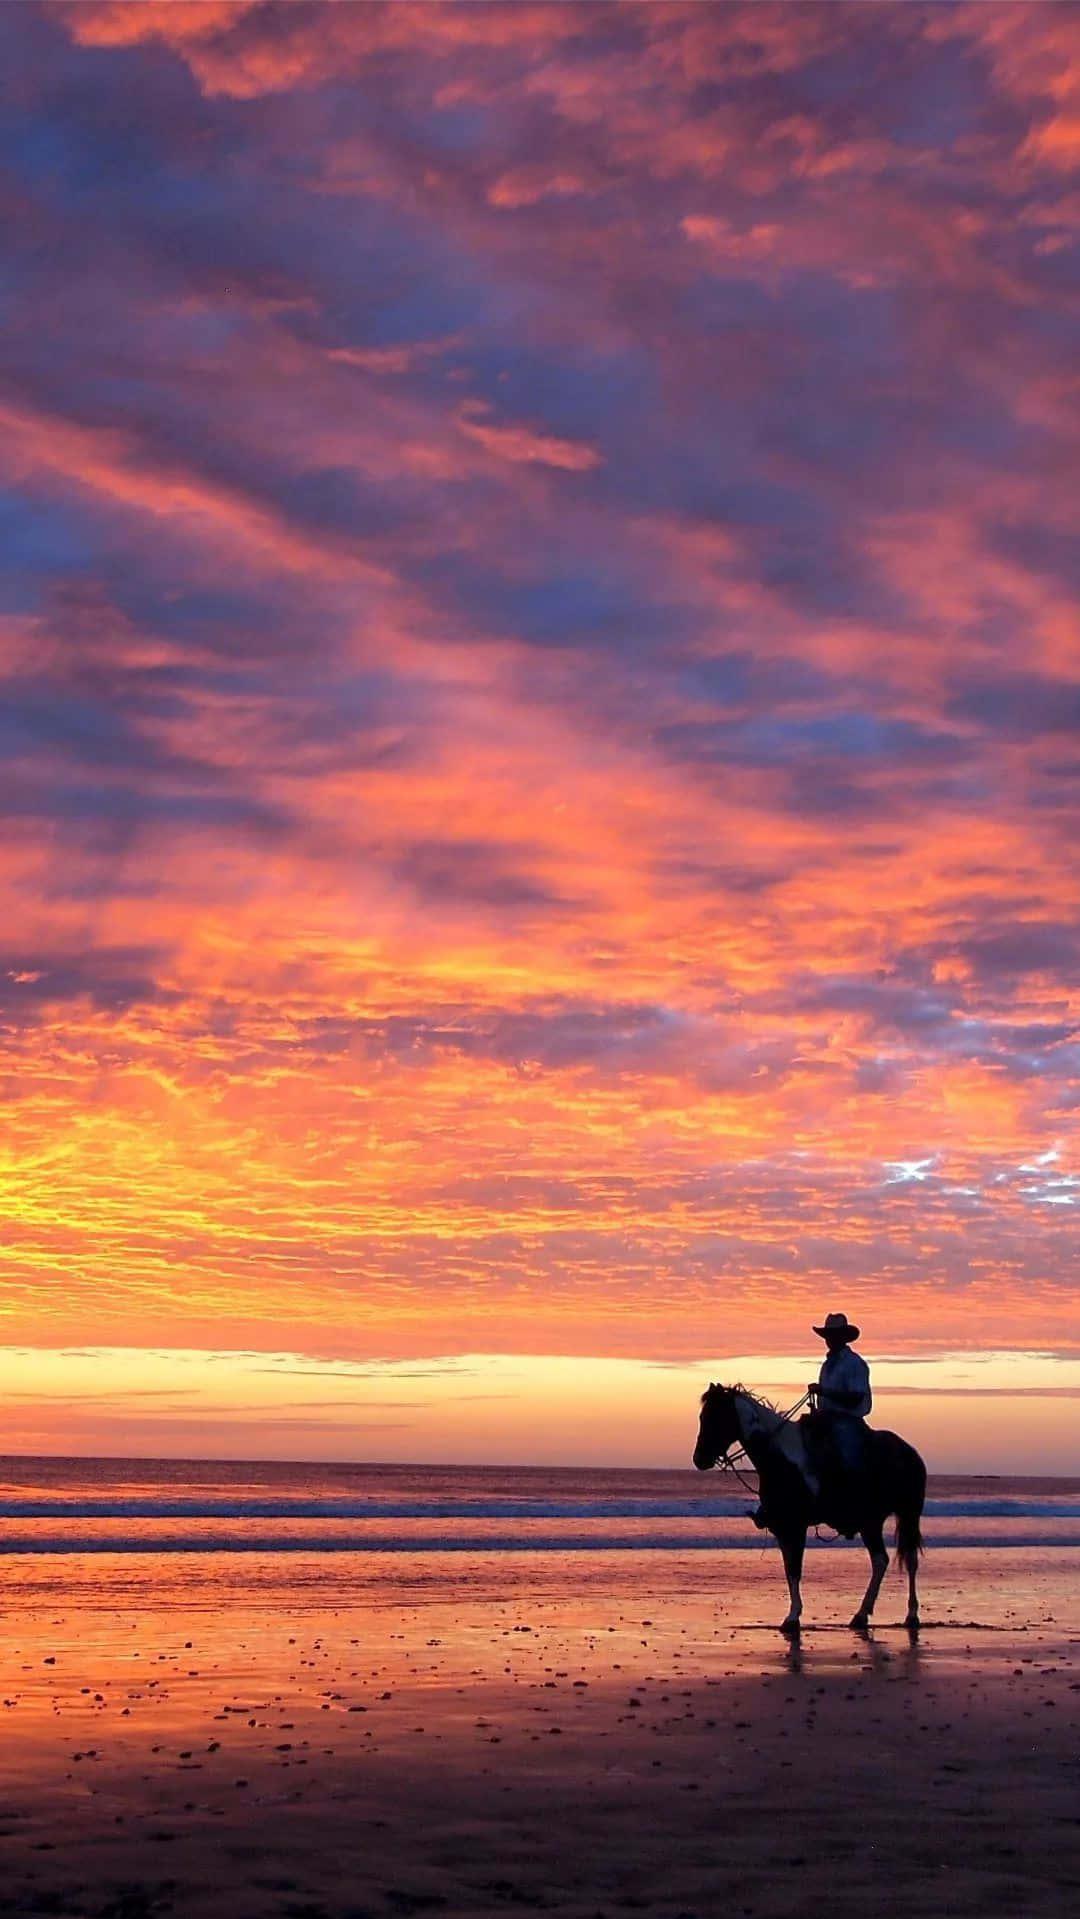 Sunset By The Beach Cowboy iPhone Wallpaper